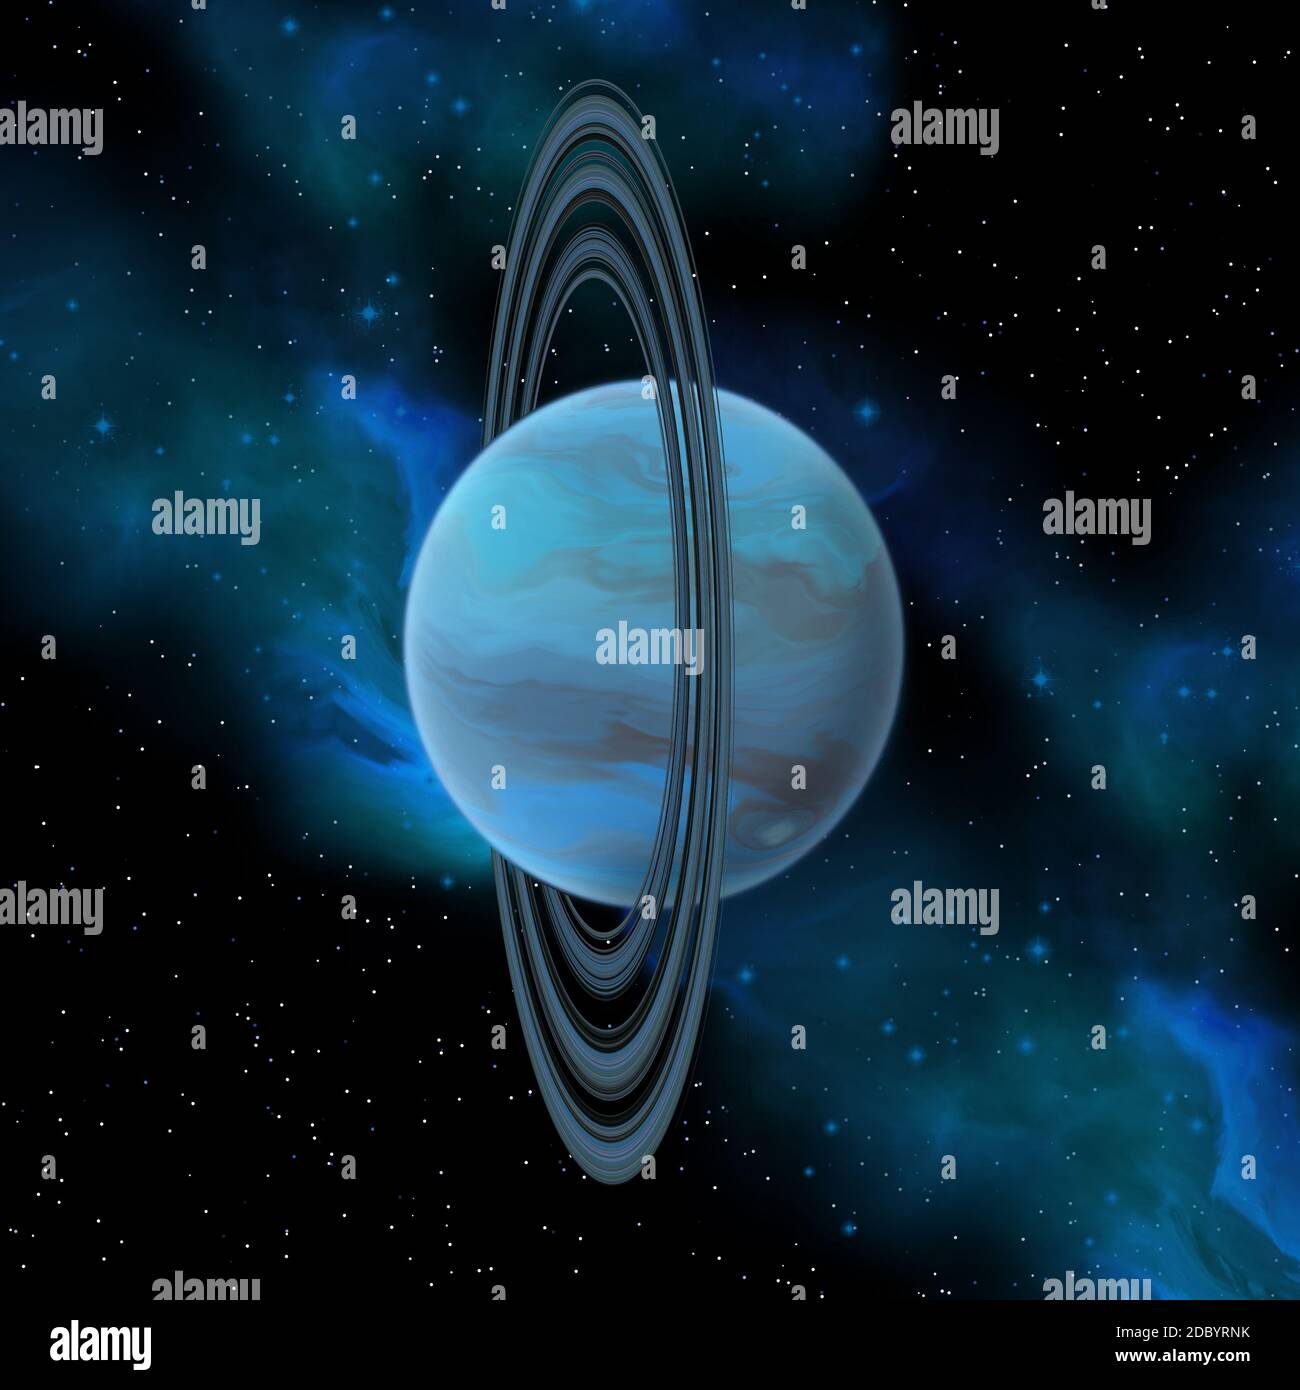 Artwork showing Uranus and its rings - Stock Image - R410/0068 - Science  Photo Library